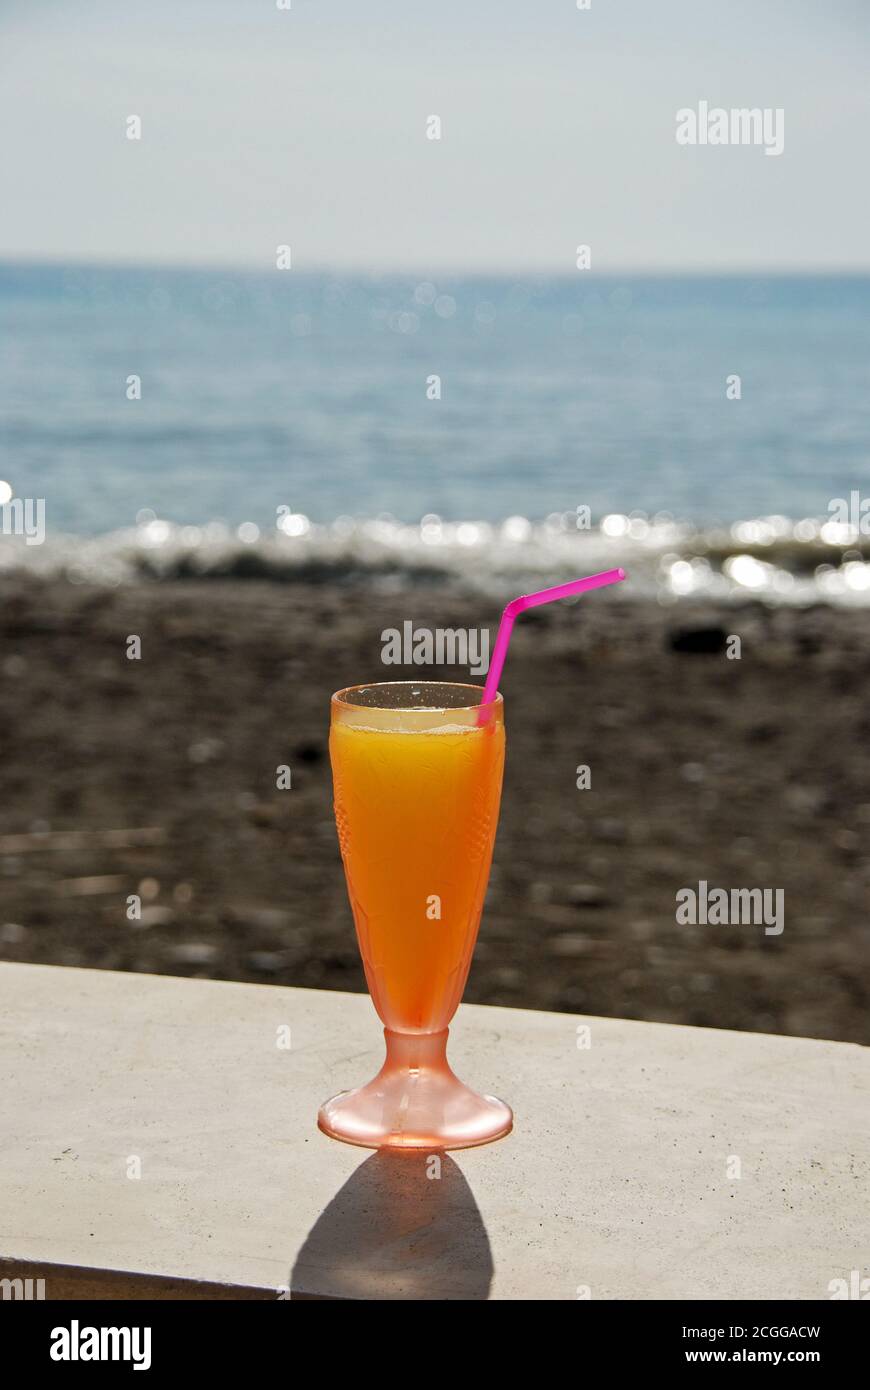 Glass of orange juice with straw with the beach and sea to the rear, Lagos, Malaga Province, Andalusia, Spain, Western Europe. Stock Photo